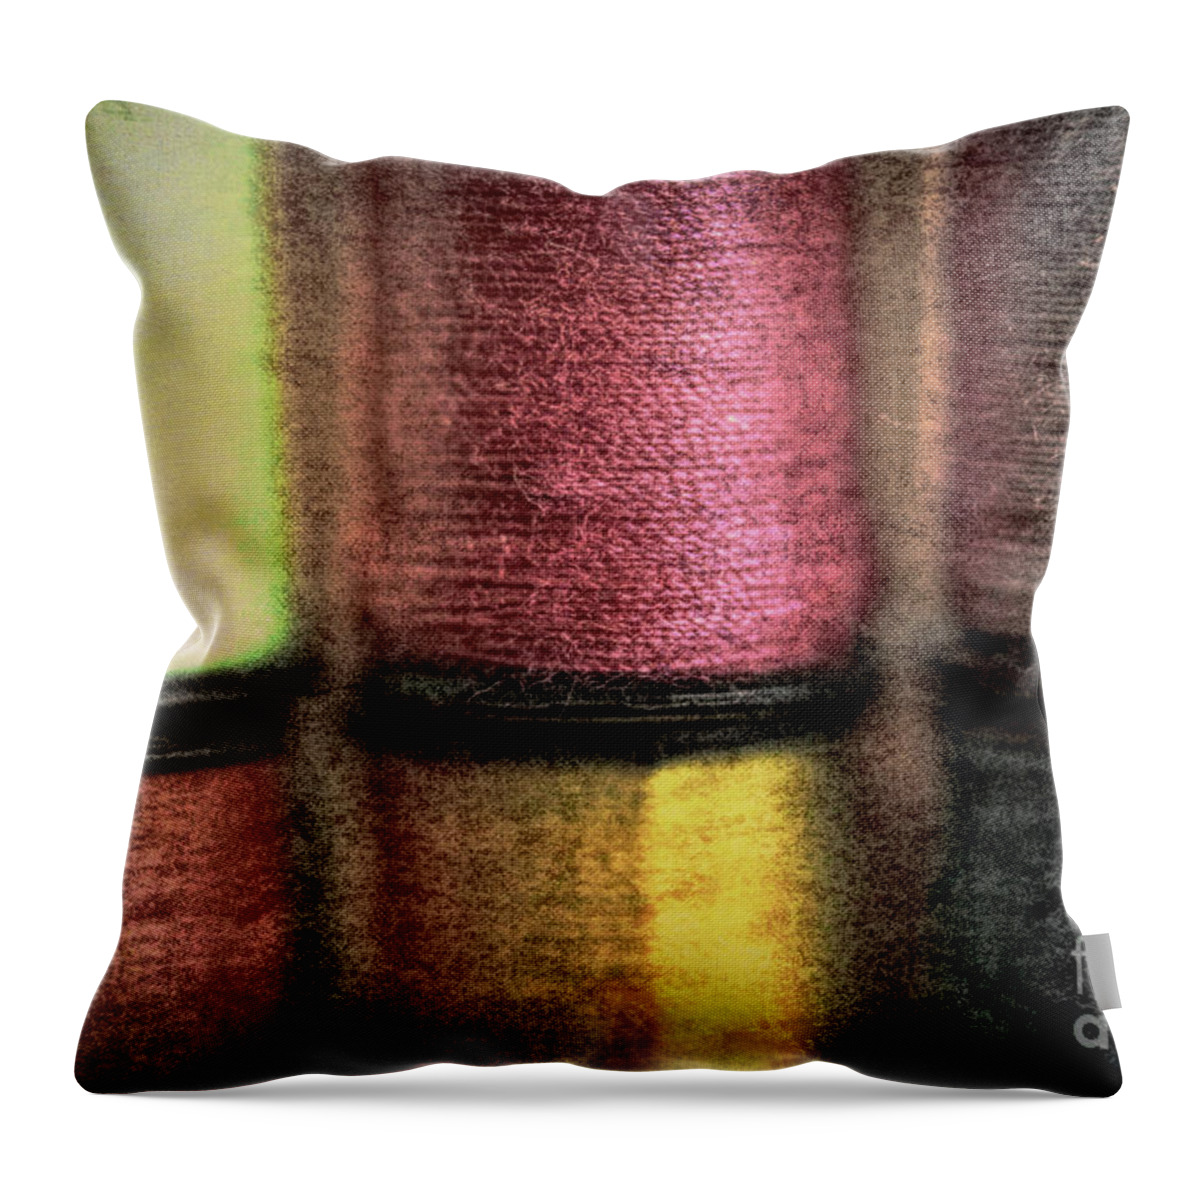 Thread Throw Pillow featuring the photograph Don't Thread On Me by Rene Crystal